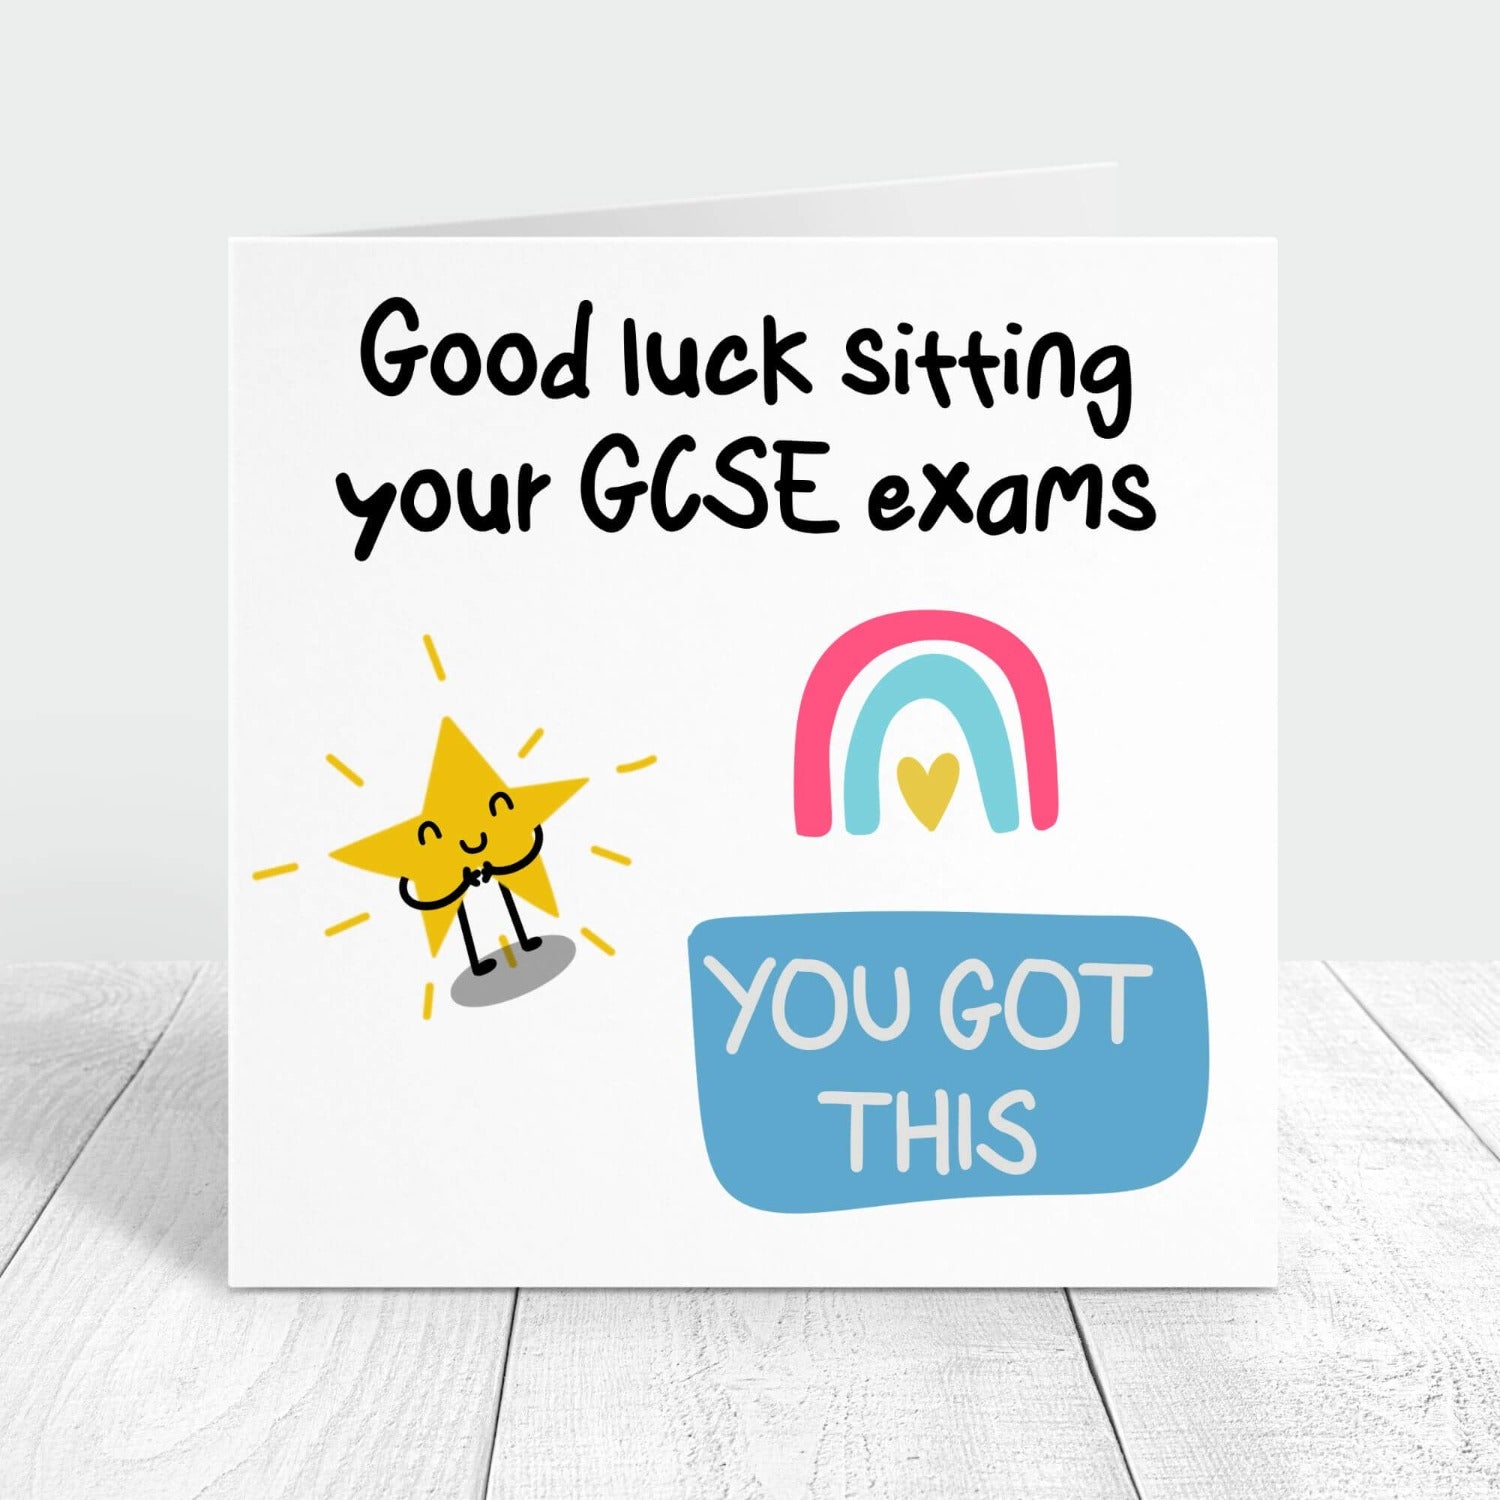 Good luck sitting your gsce exams